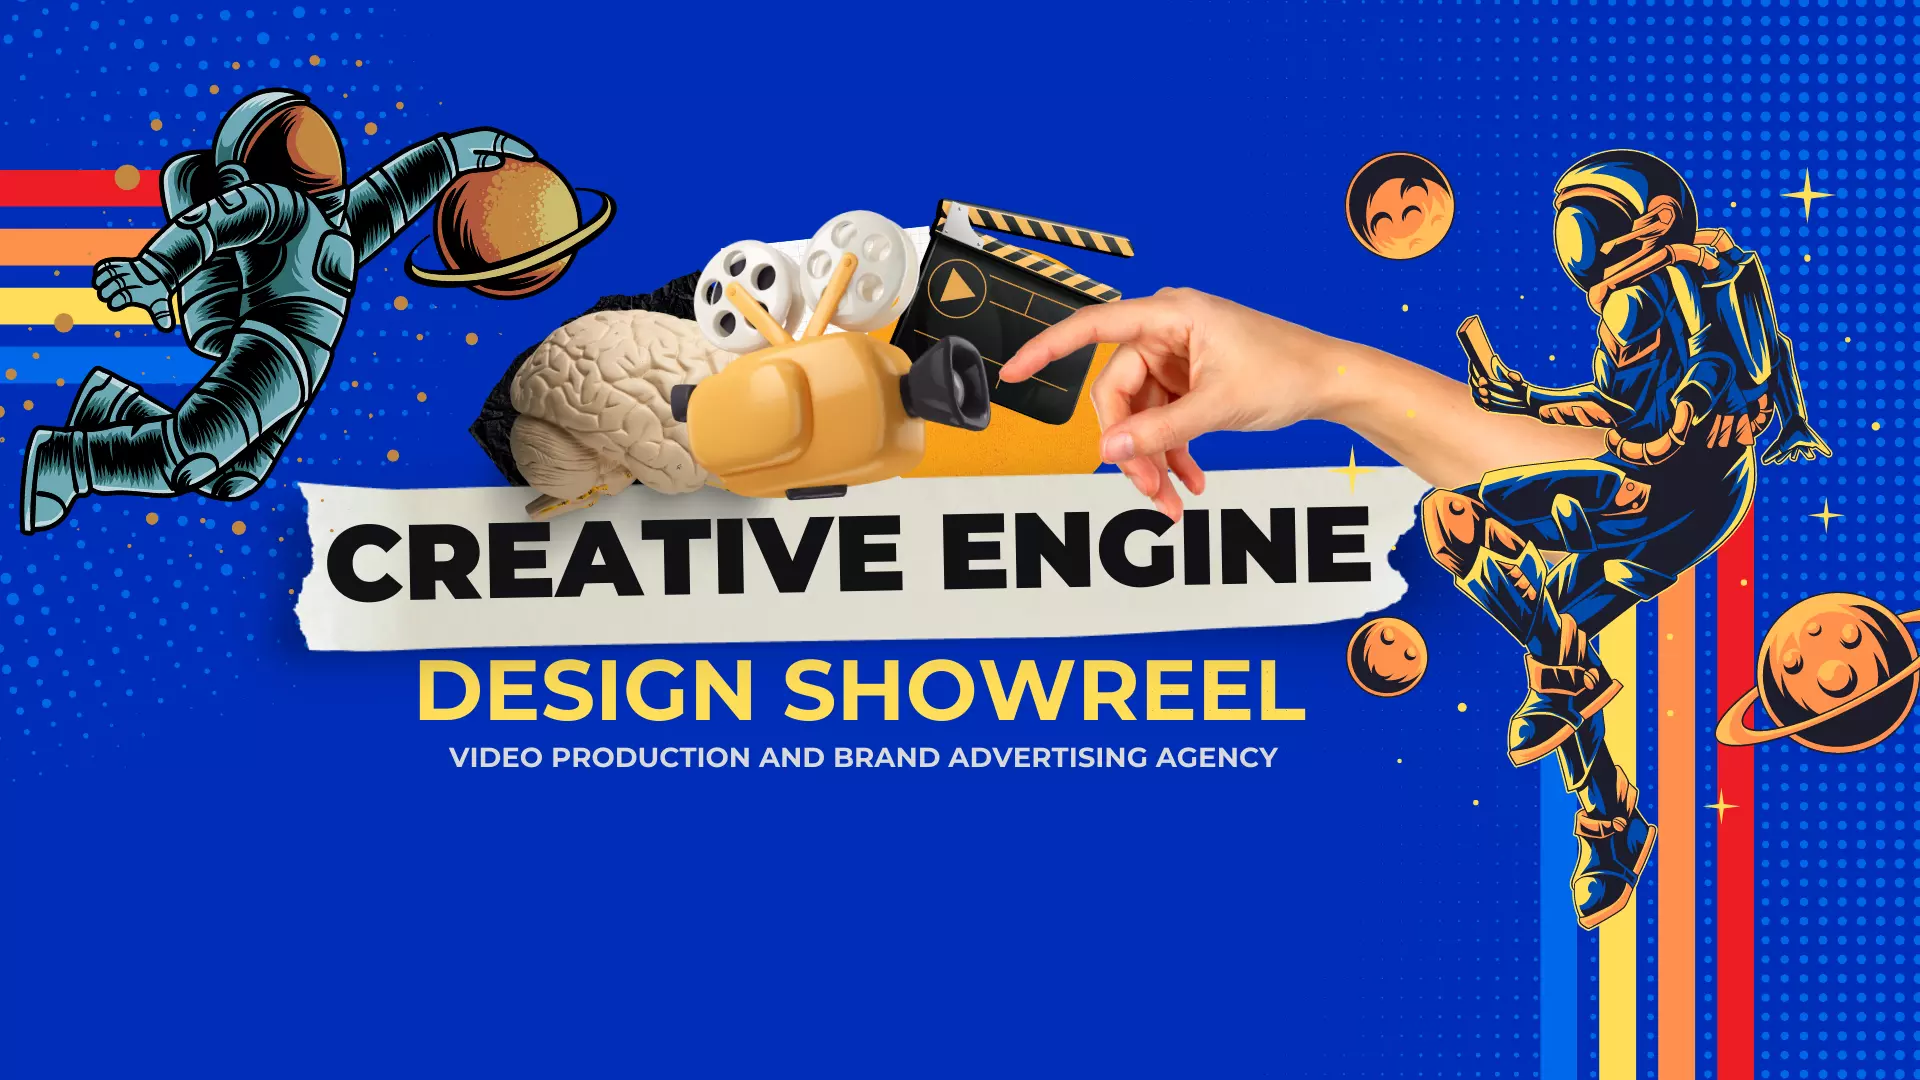 Creative Engine - Design Showreel - A video production and brand advertising agency lahore, Pakistan